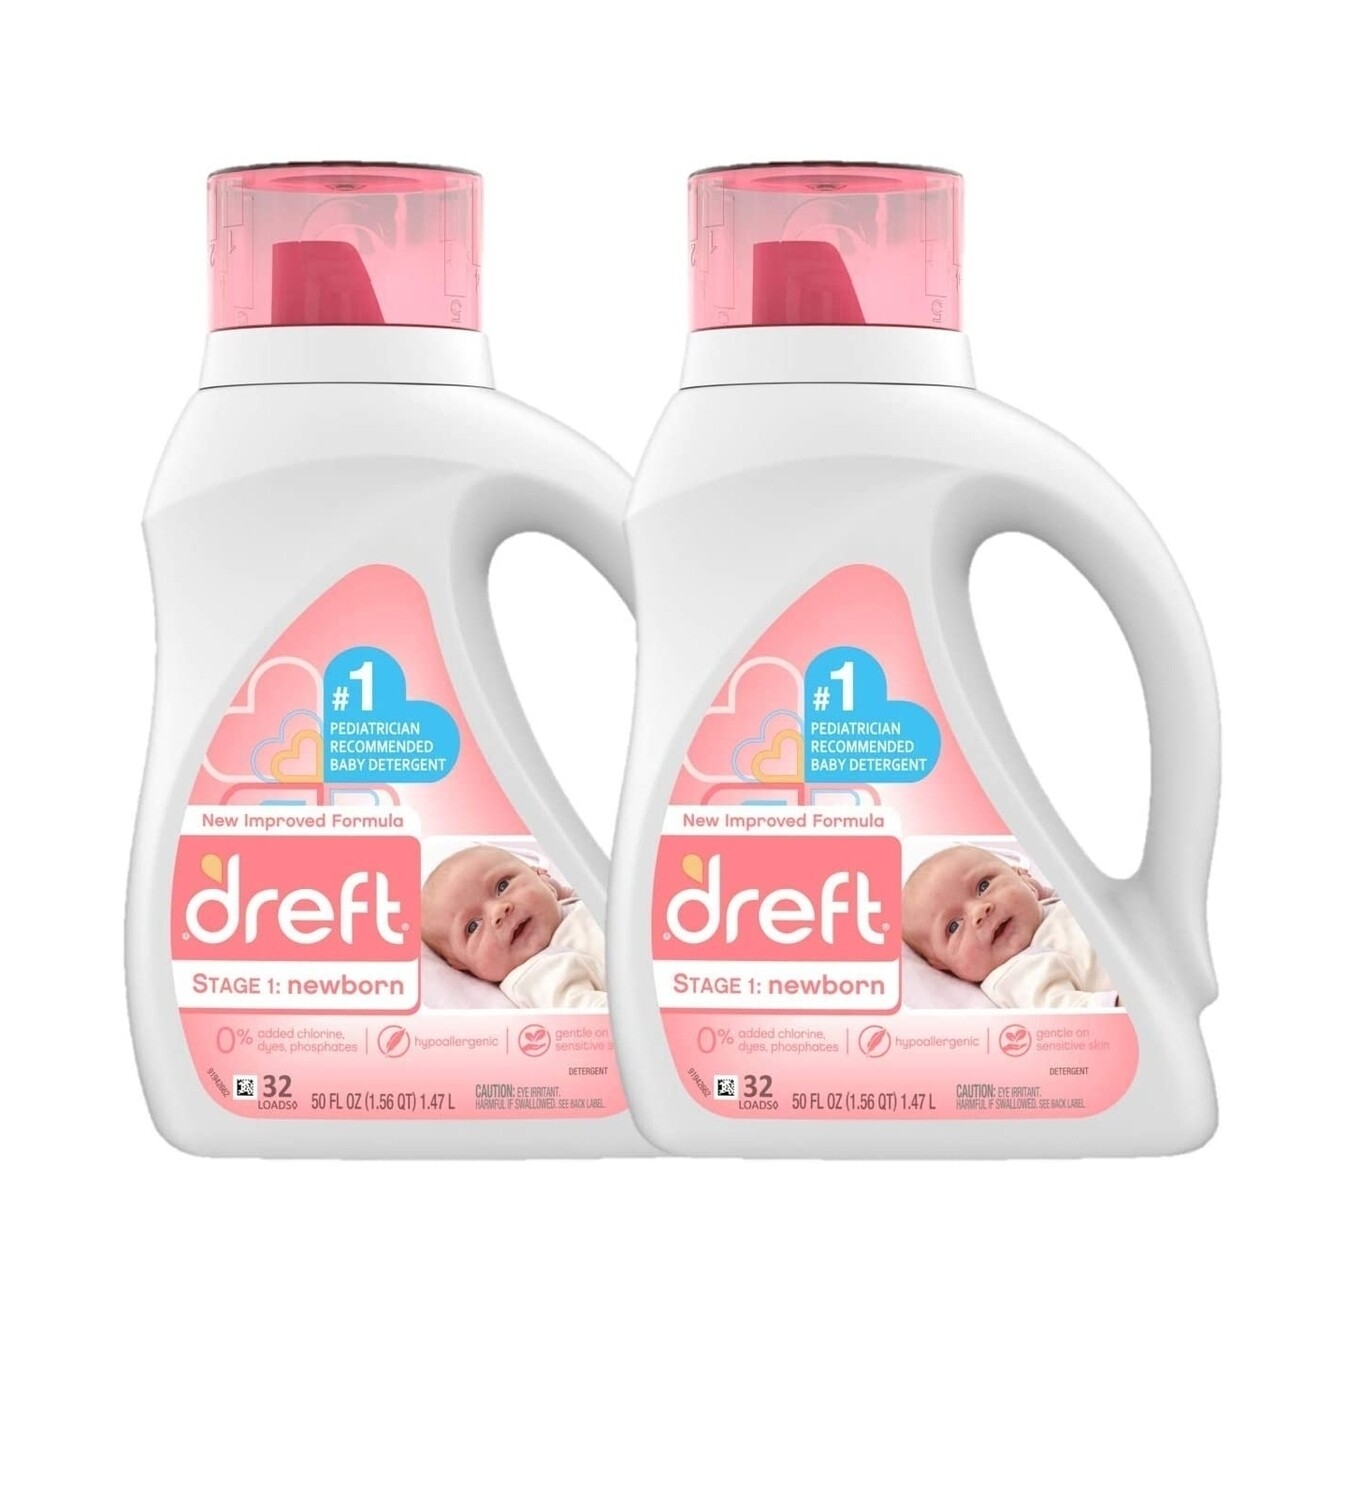 Dreft Stage 1: Newborn Hypoallergenic Liquid Baby Laundry Detergent (HE), Natural for Baby, Newborn, or Infant, 32 Loads (Packaging May Vary), 50 Fl Oz (1 bottle)